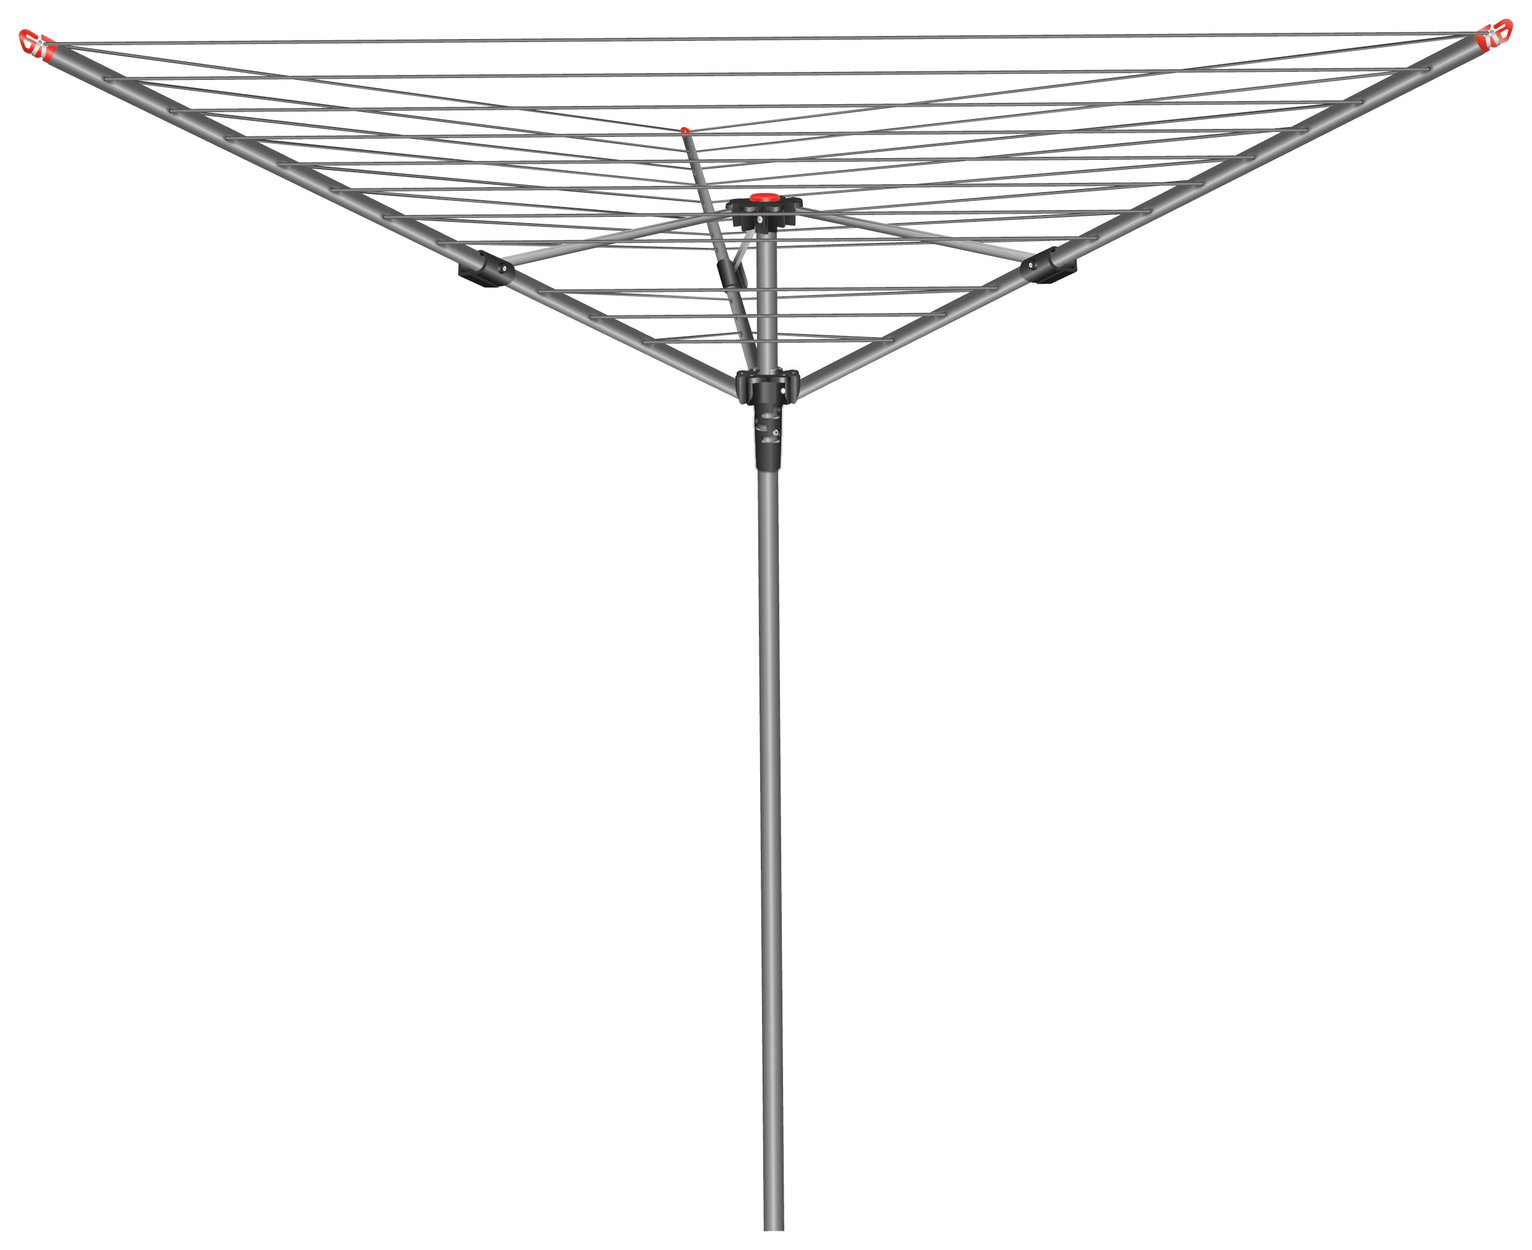 Vileda 40m 3 Arm Rotary Outdoor Washing Line review